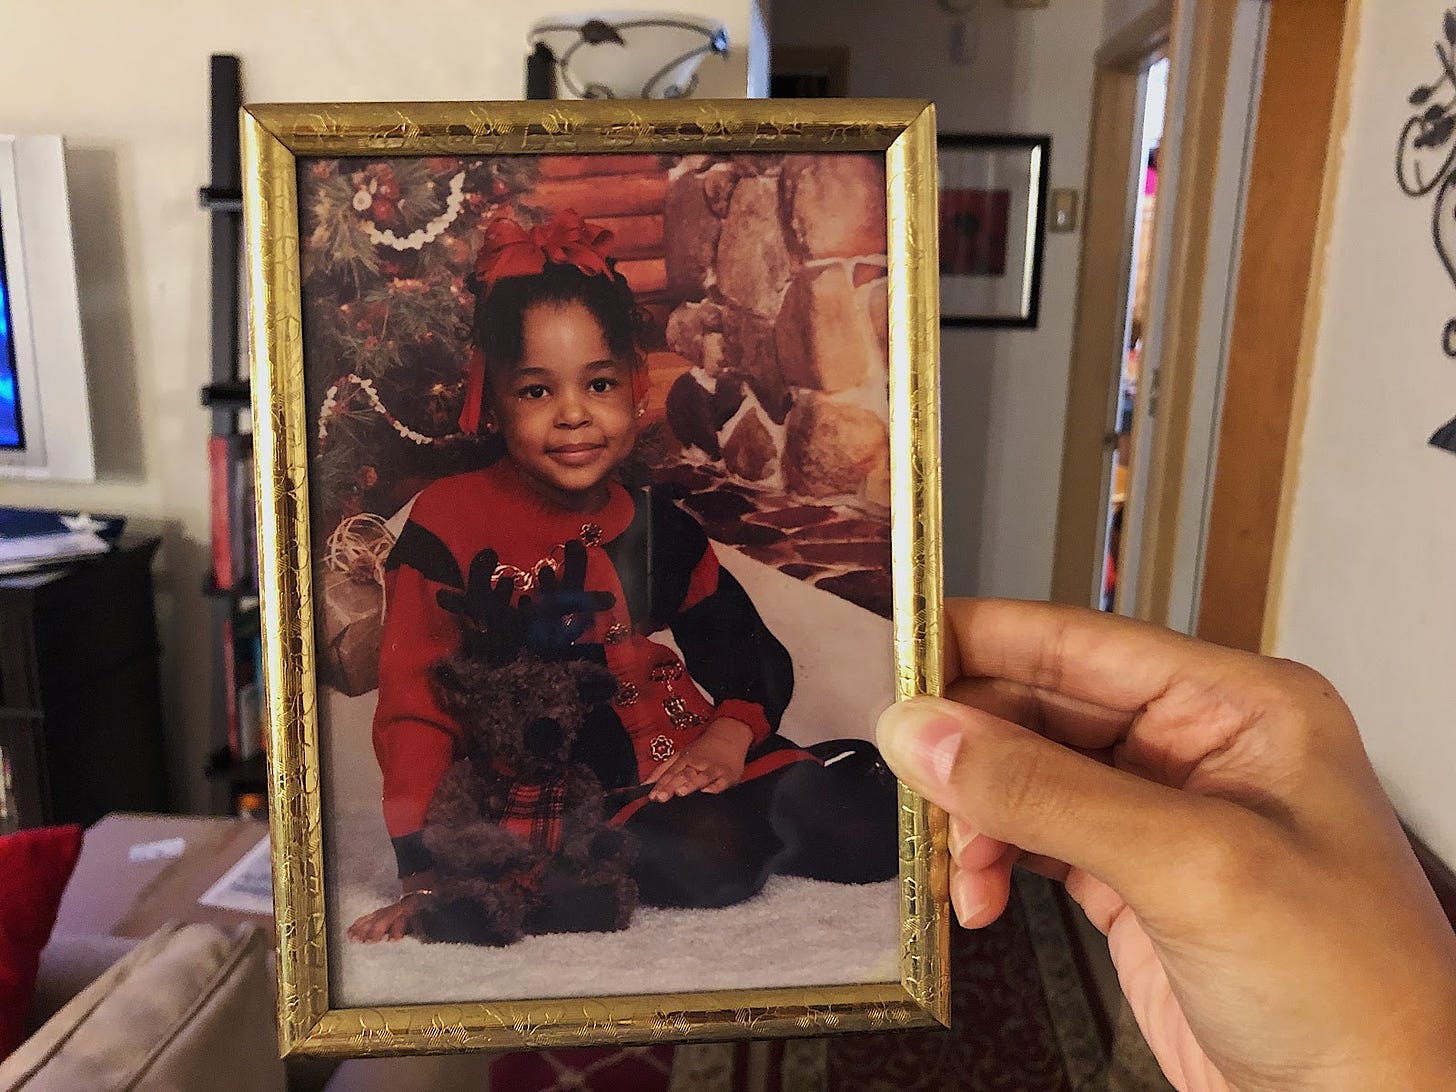 A hand holding up a framed picture of a black girl in red and black Christmas clothes and a stuffed reindeer posing for a photo.